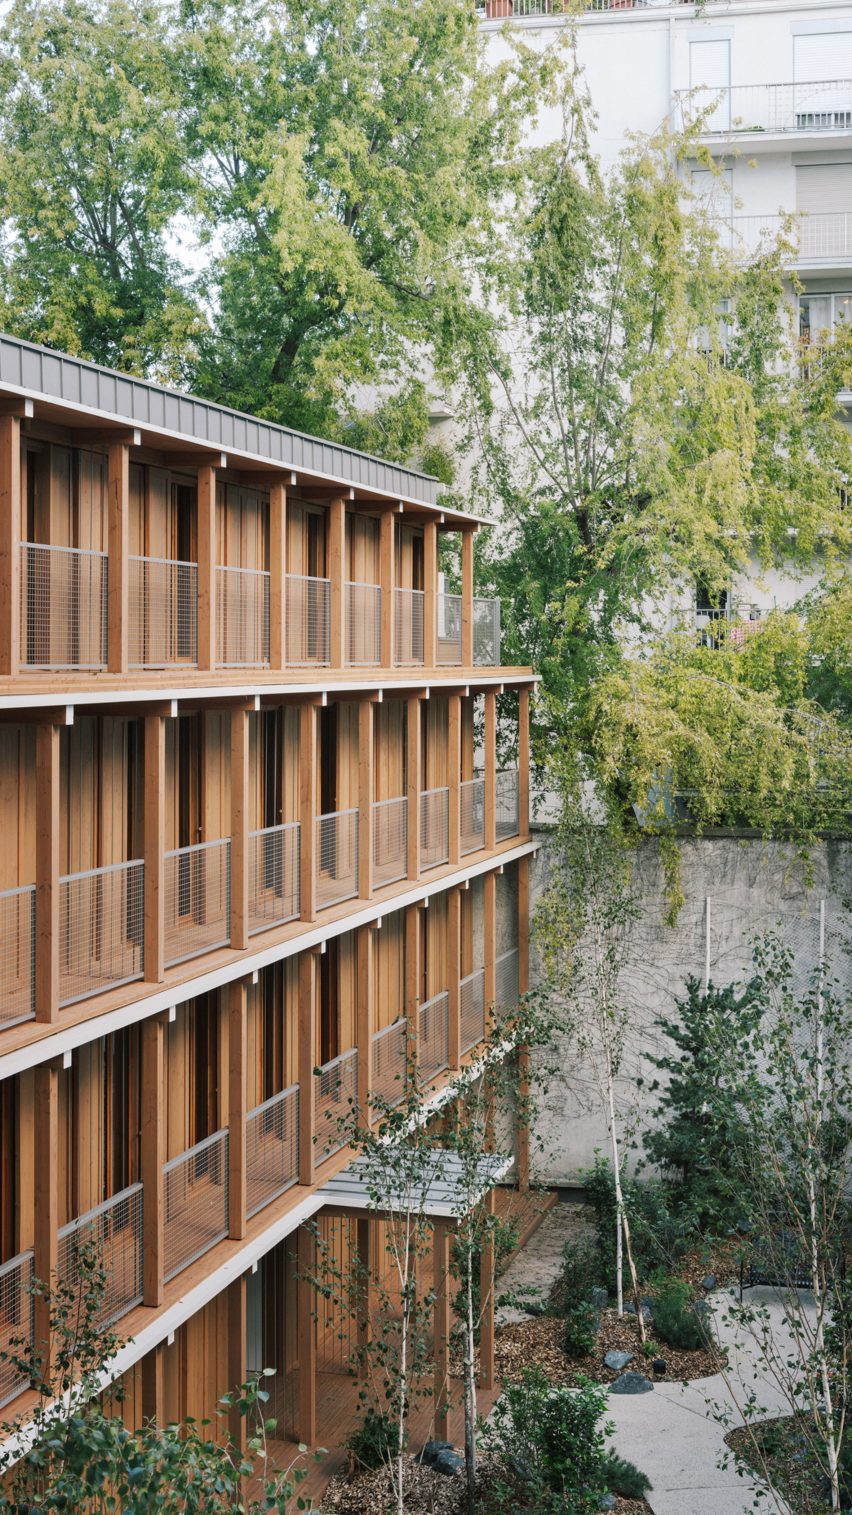 Side view of apartment block in wood